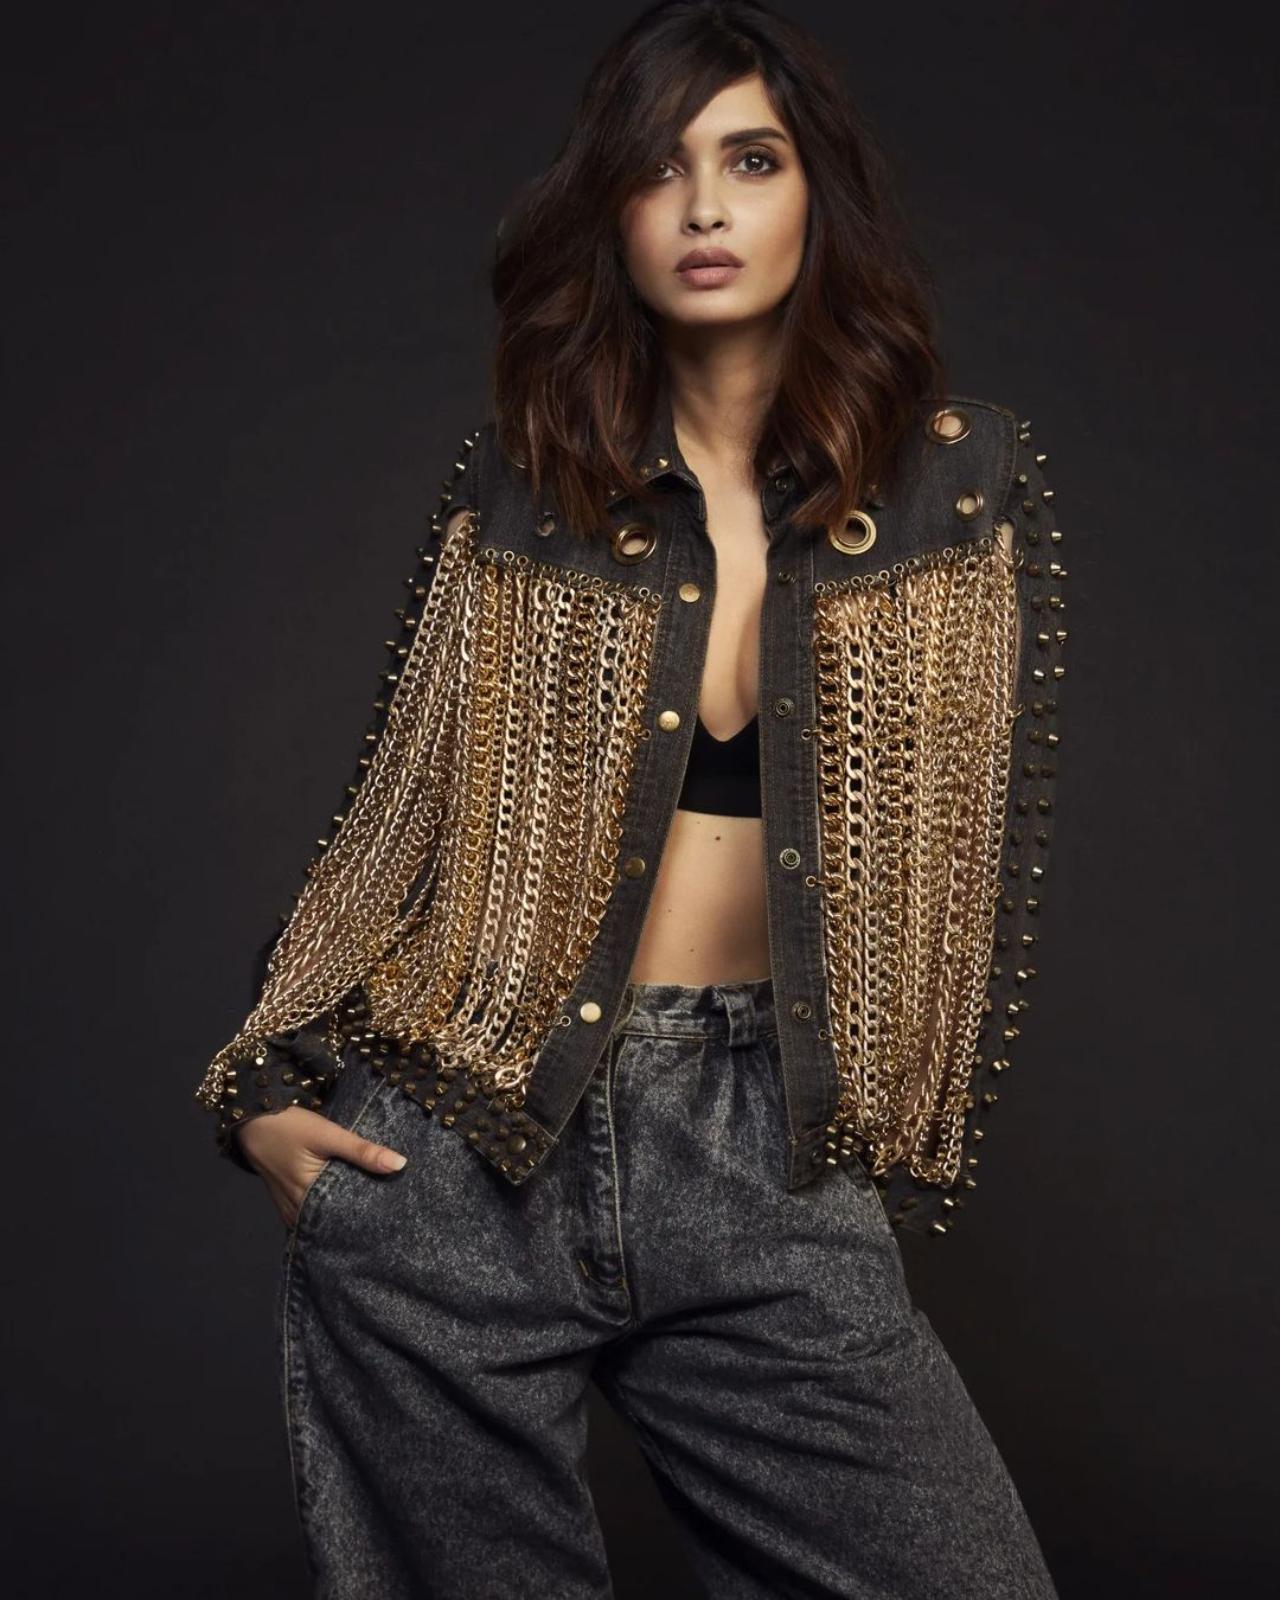 This is the perfect way to add the X factor to a denim-on-denim look. The golden mettalic chains on the jacket take the look to a whole another level and needless to say you don't require any other accessory for your look